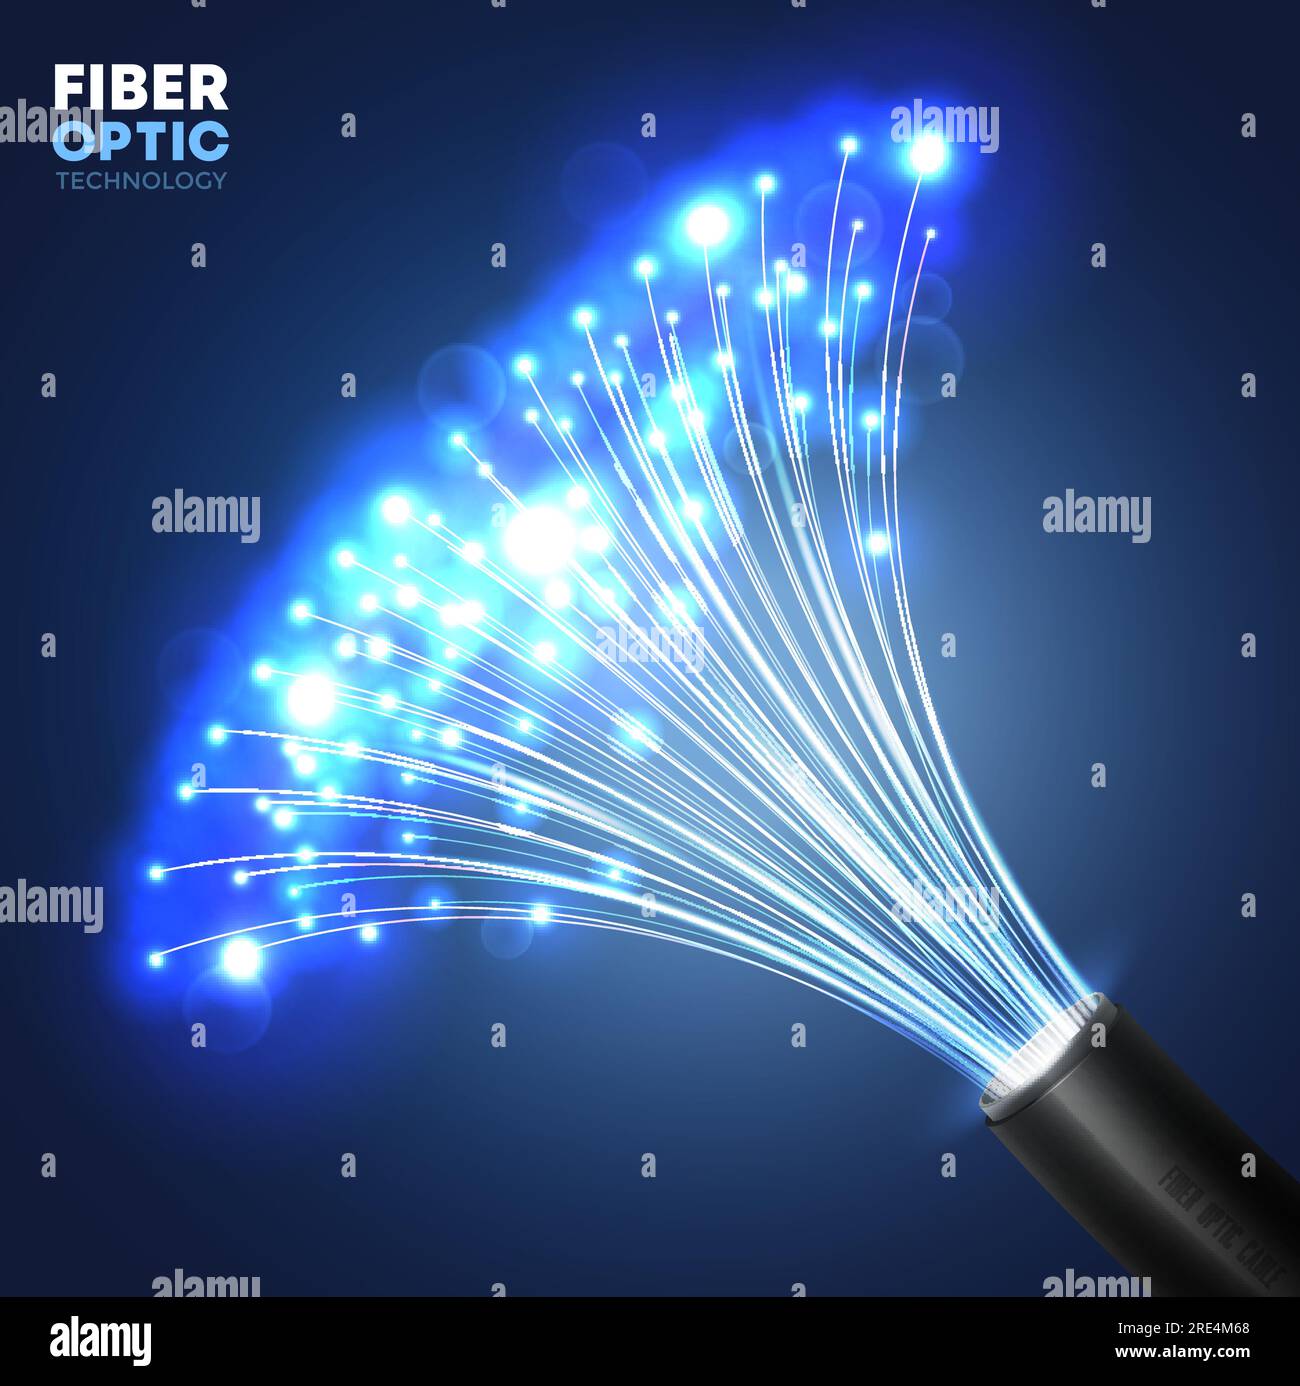 Fiber optic communication technology. Realistic vector cable with glowing bright blue light bundle of optic fibers. Telecommunication, data and Internet data transfer future tech background Stock Vector